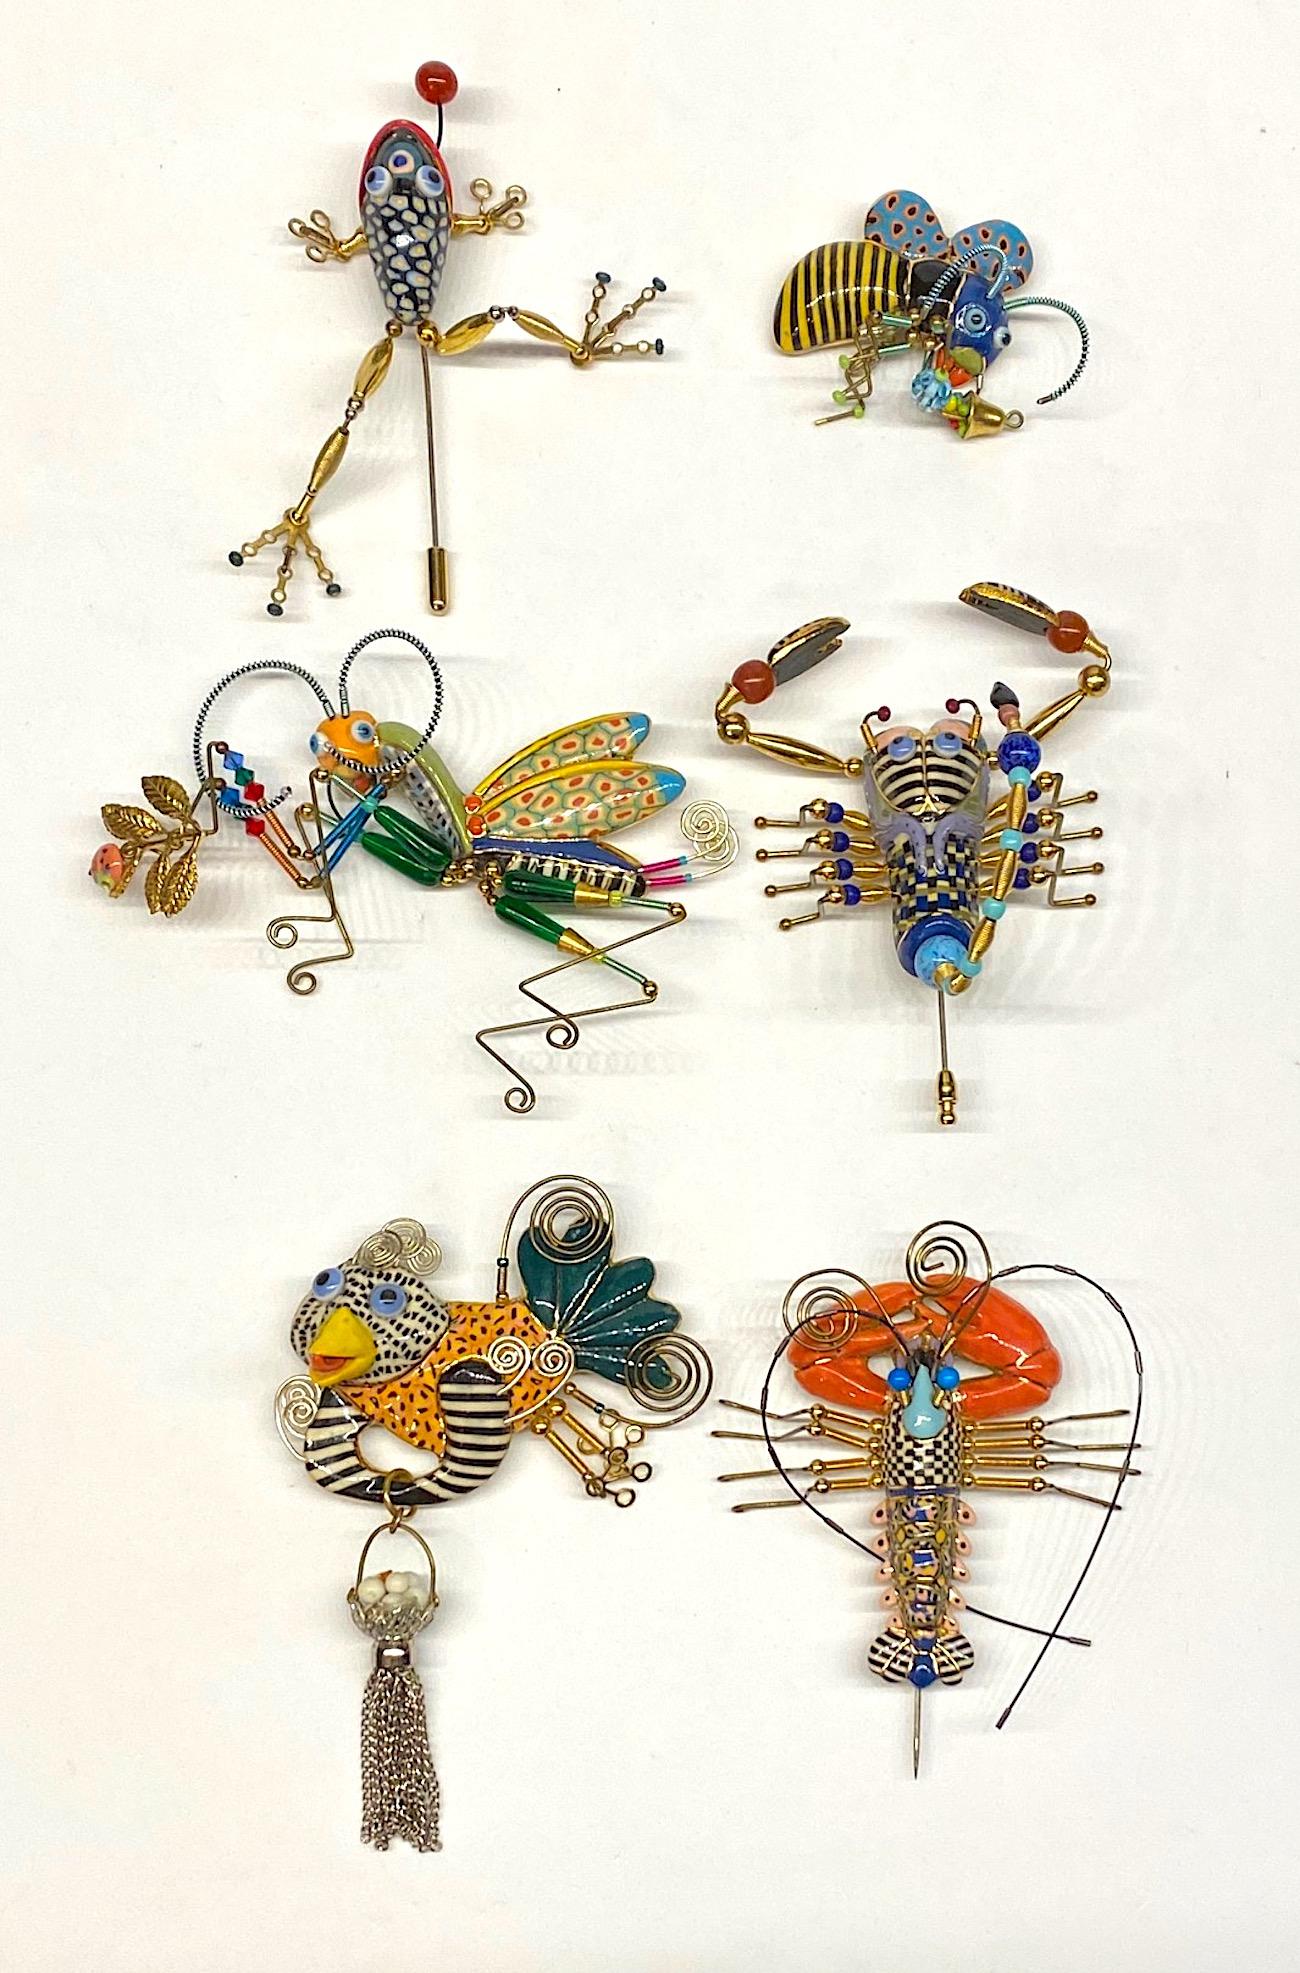 Cynthia Chuang, Jewelry 10, Porcelain & Glass Frog Brooch 8